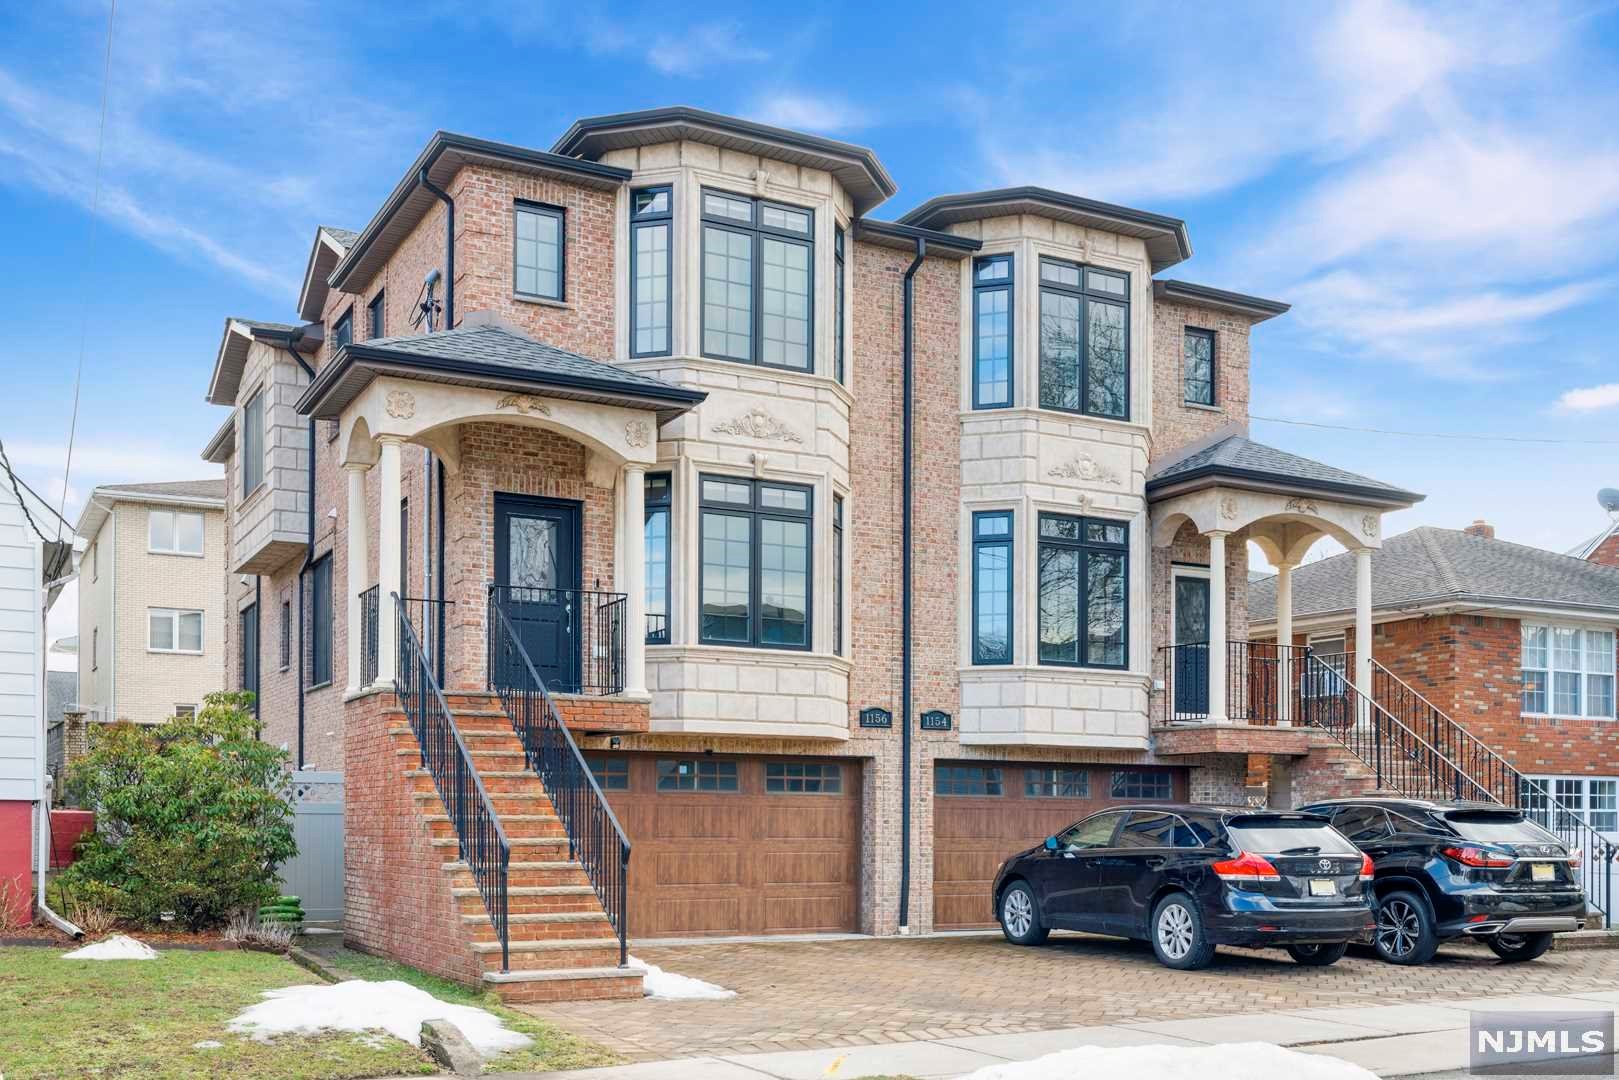 MLS Number 22004192 - 3 bed,2 bath, Condo/Coop/Townhouse Property for  $960,000 - 1156 15th Street, Fort Lee, NJ - New Jersey Multiple Listing  Service